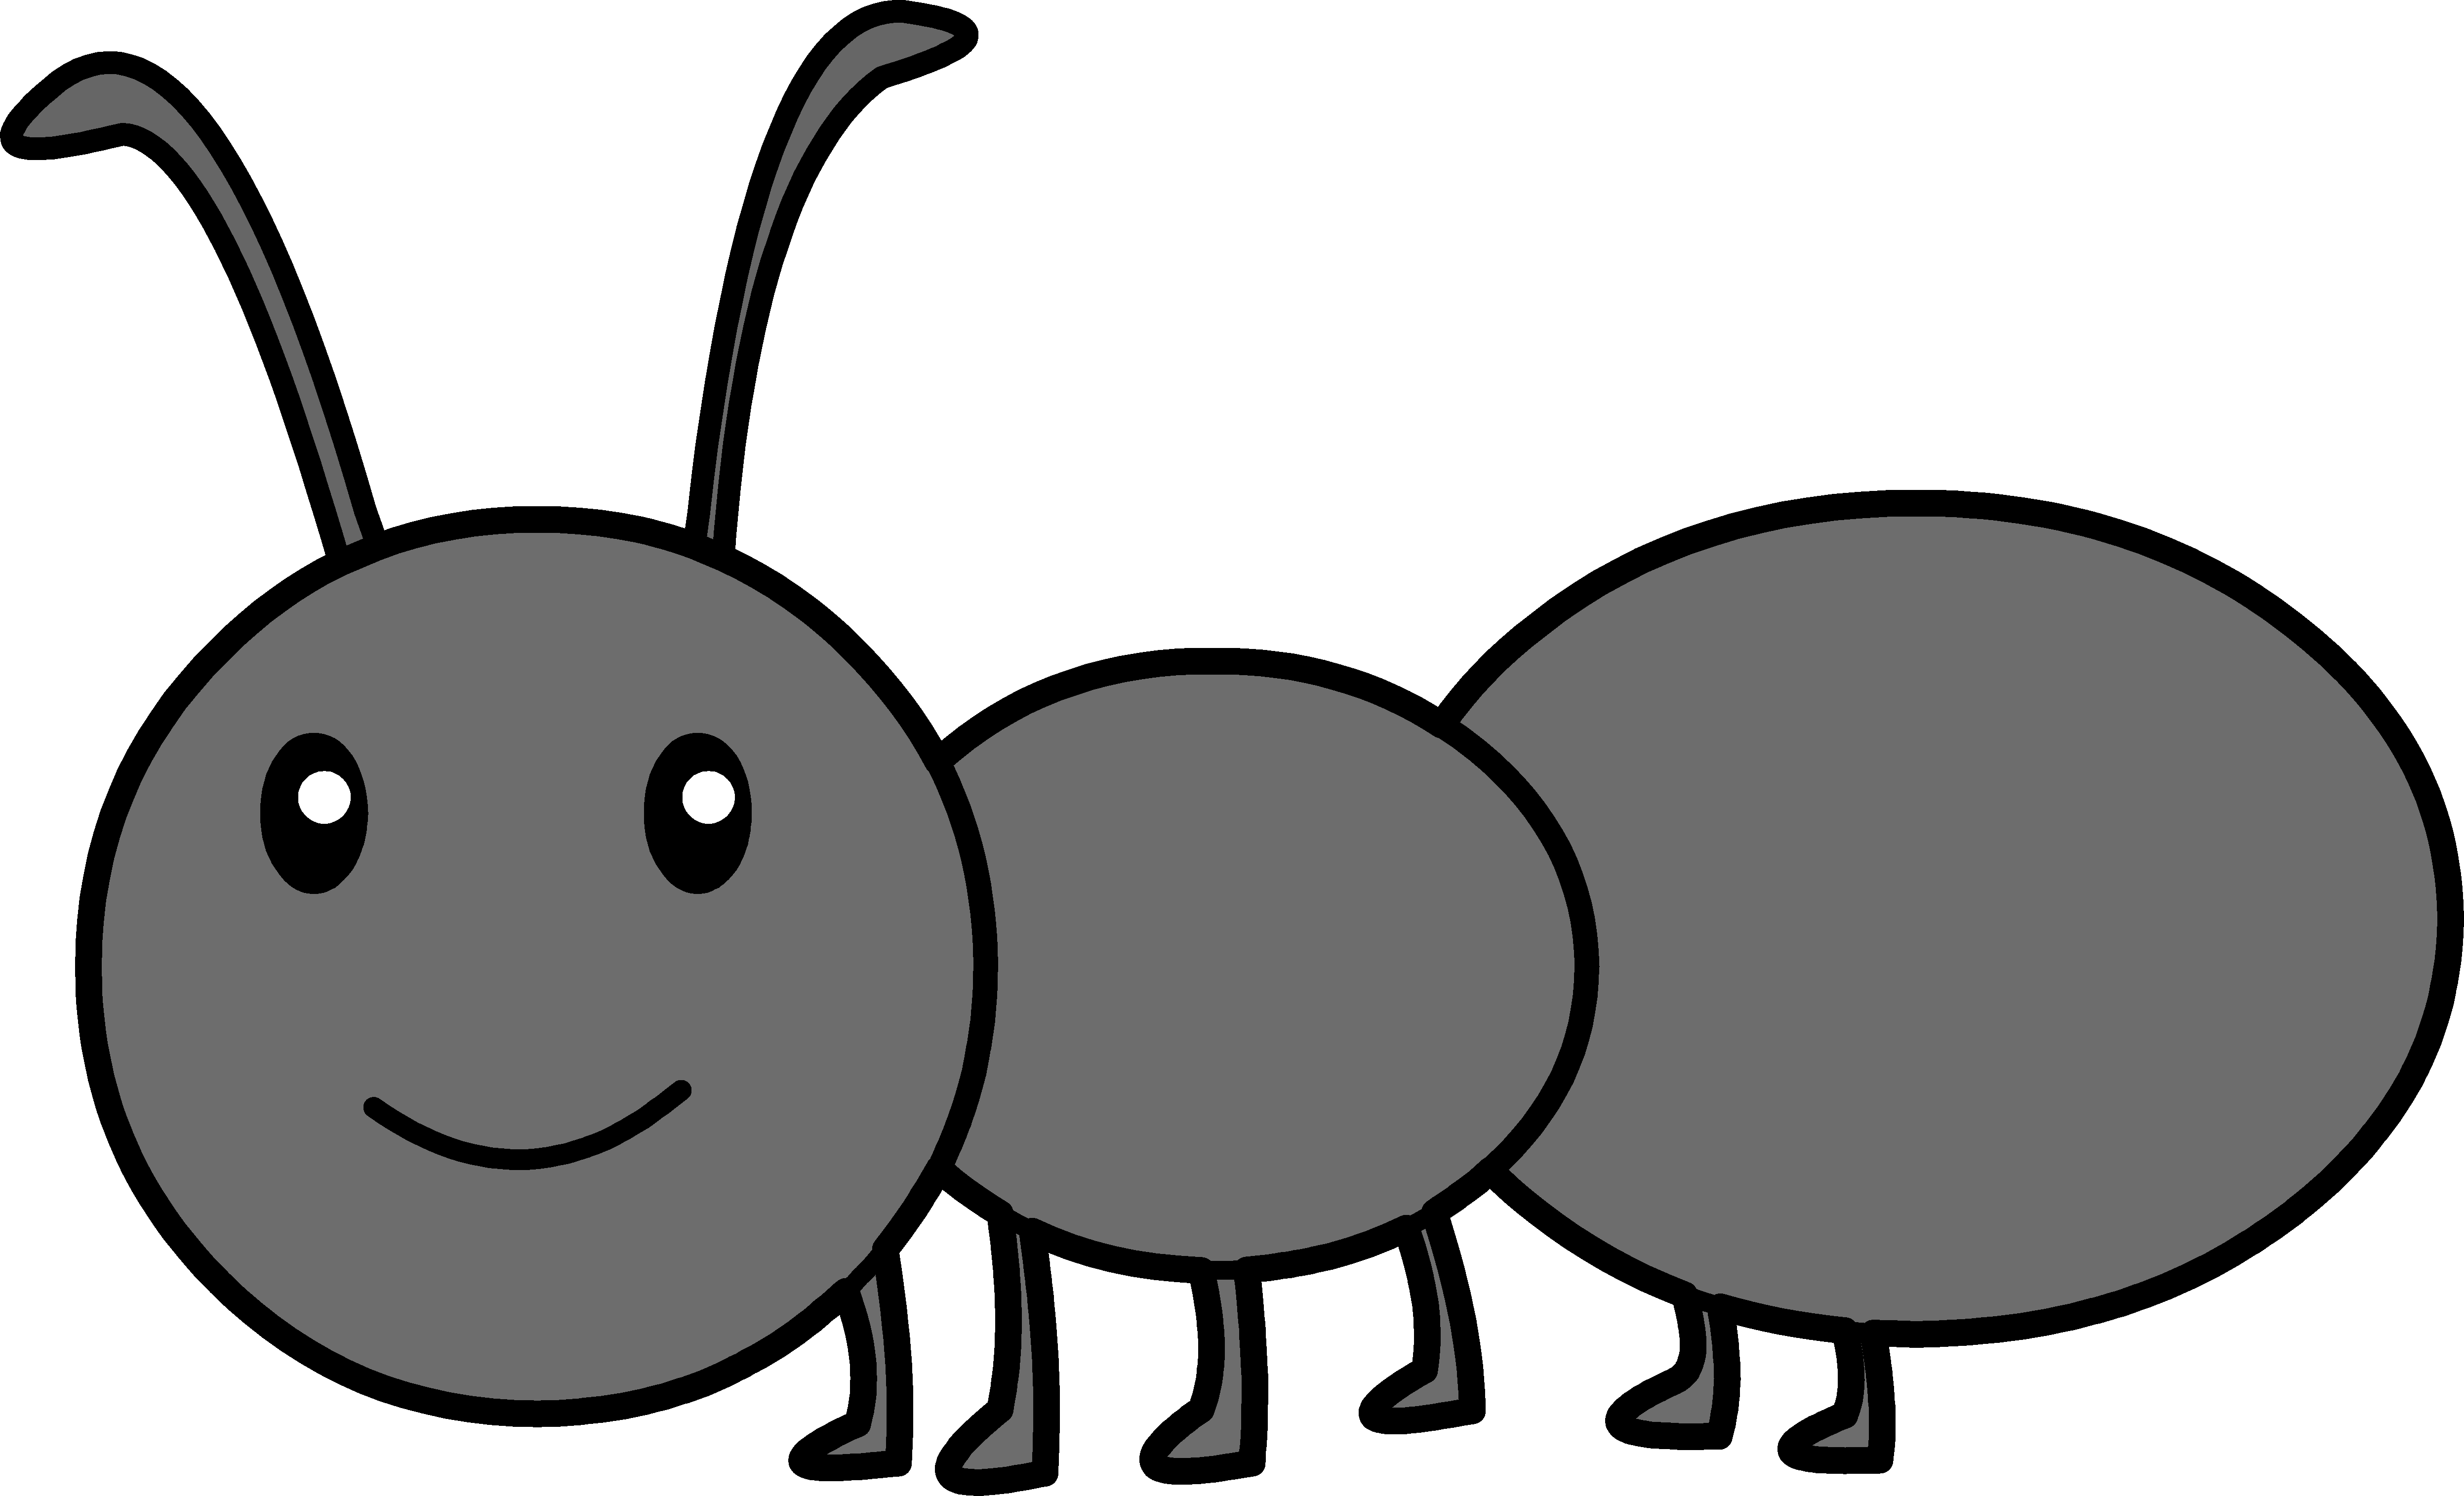 Ants clipart simple. Cute ant letters format